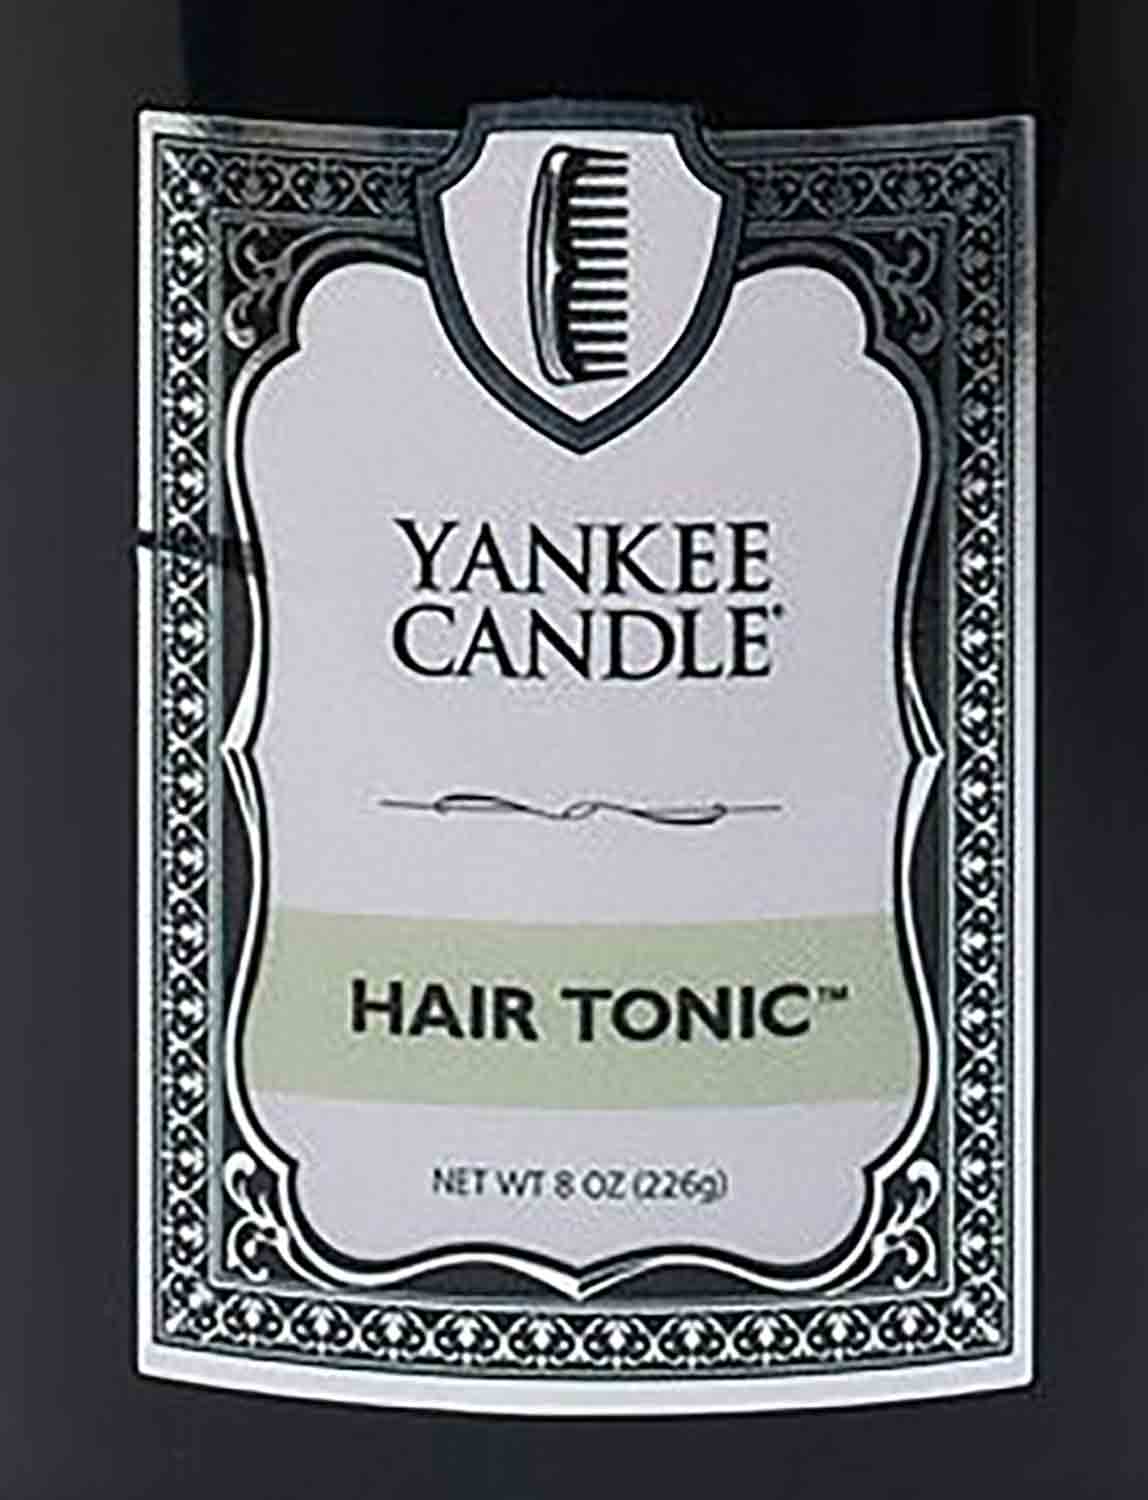 Hair Tonic Yankee Candle 22 g - Crumble vosk